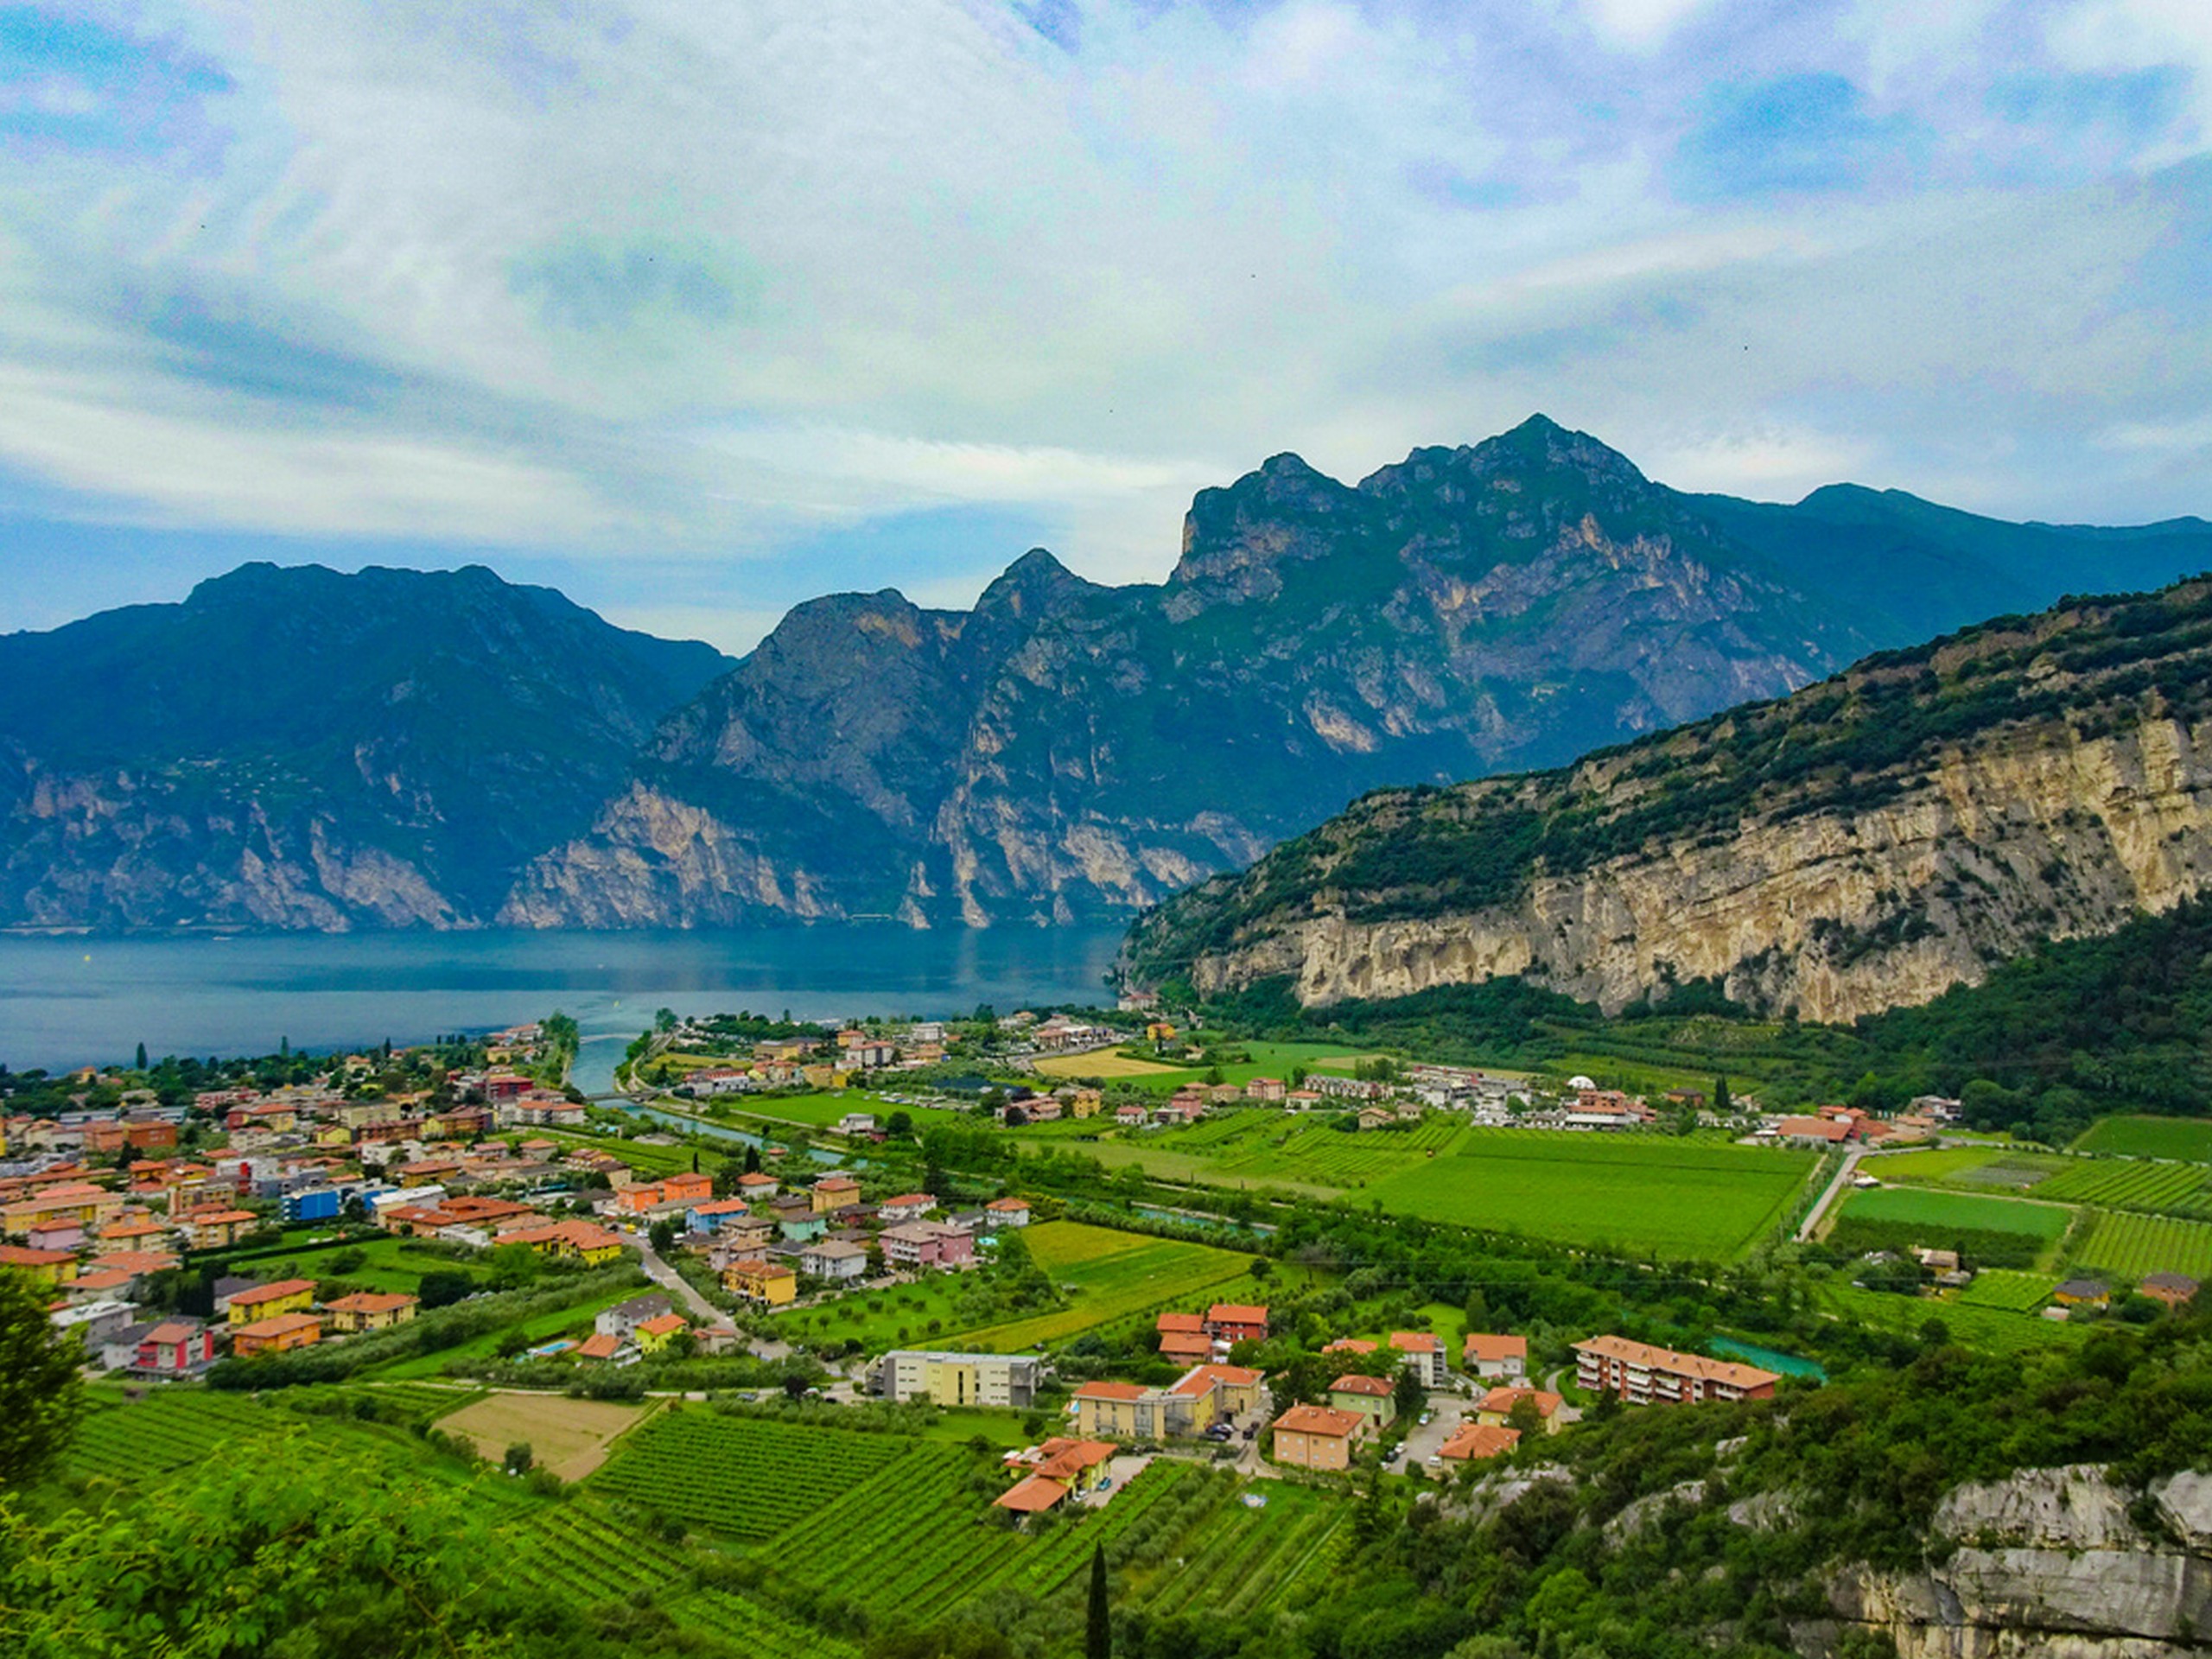 Looking at Garda Lake from the distance, while on a biking tour